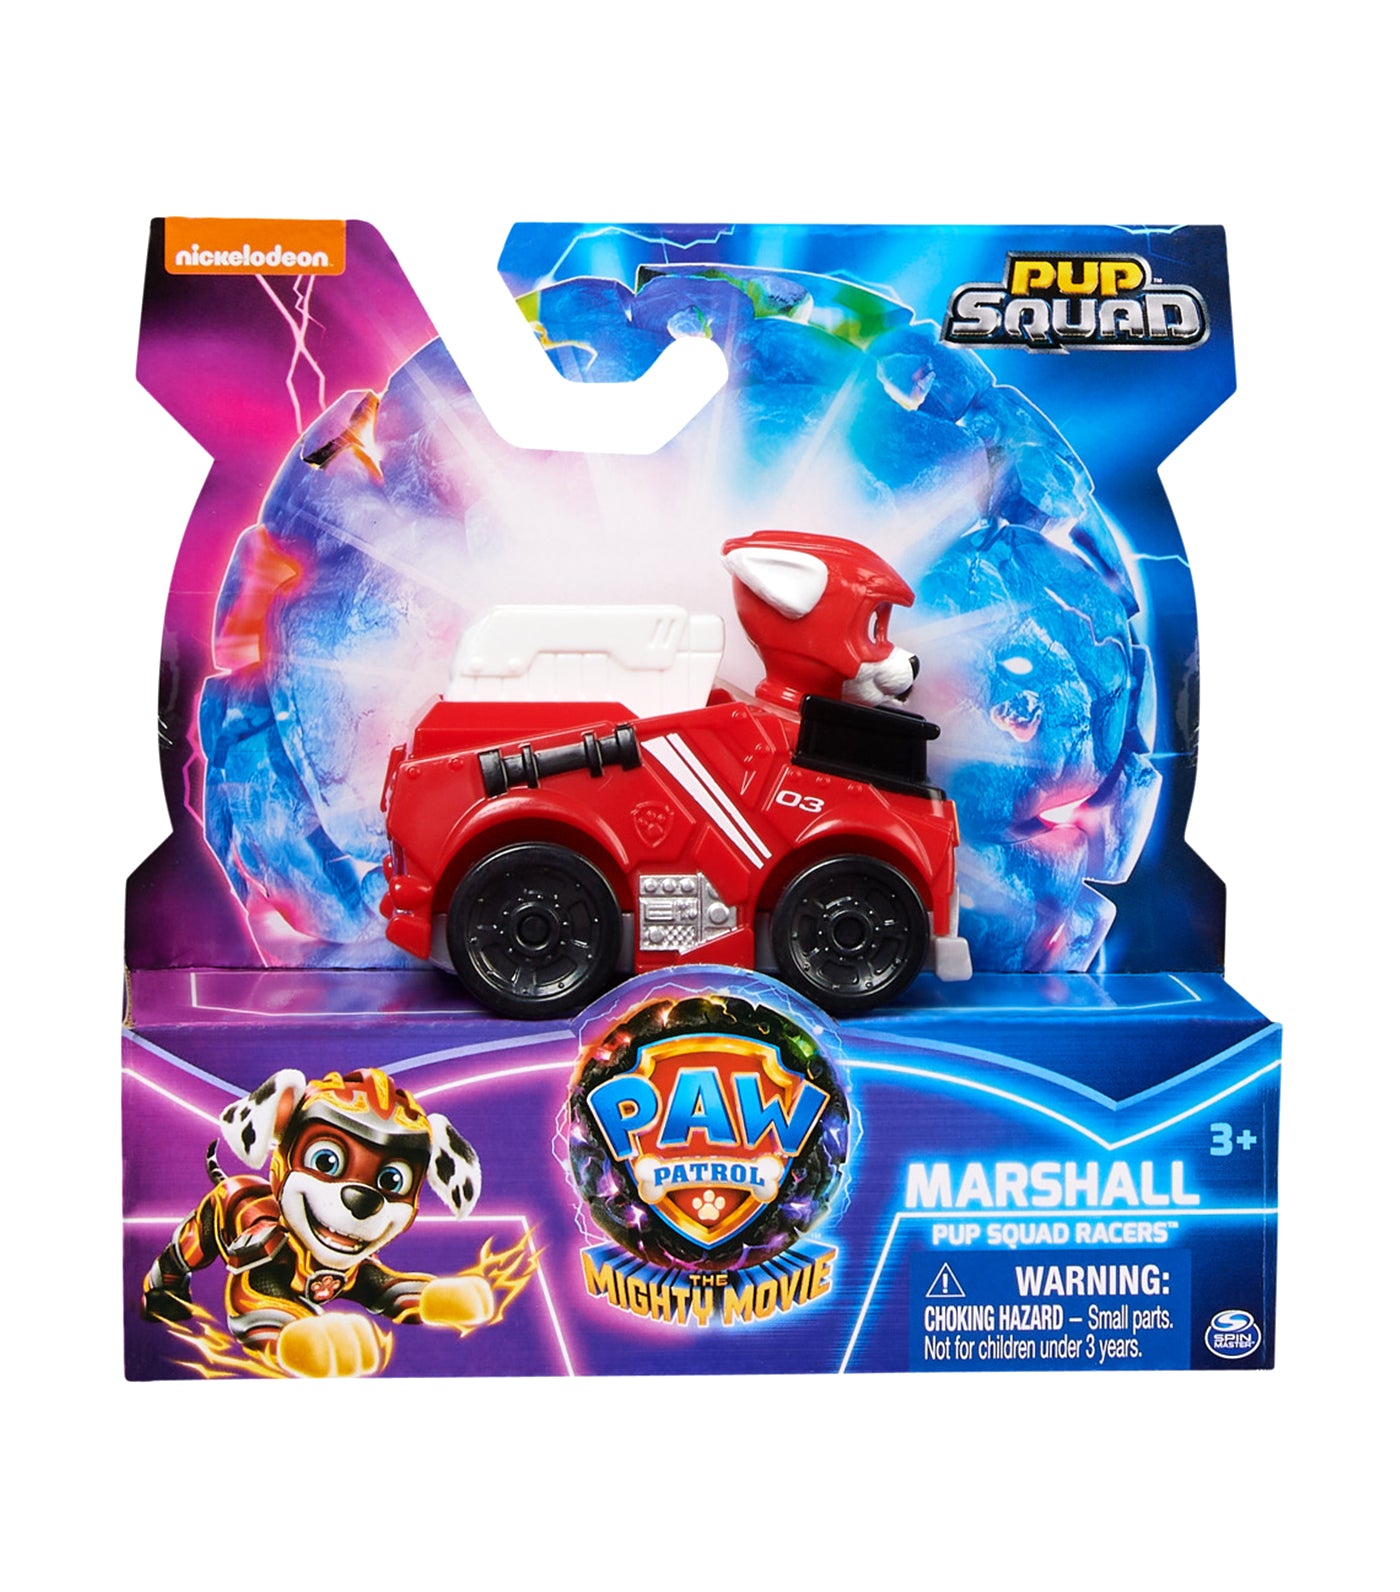 Marshall Pup Squad Racers